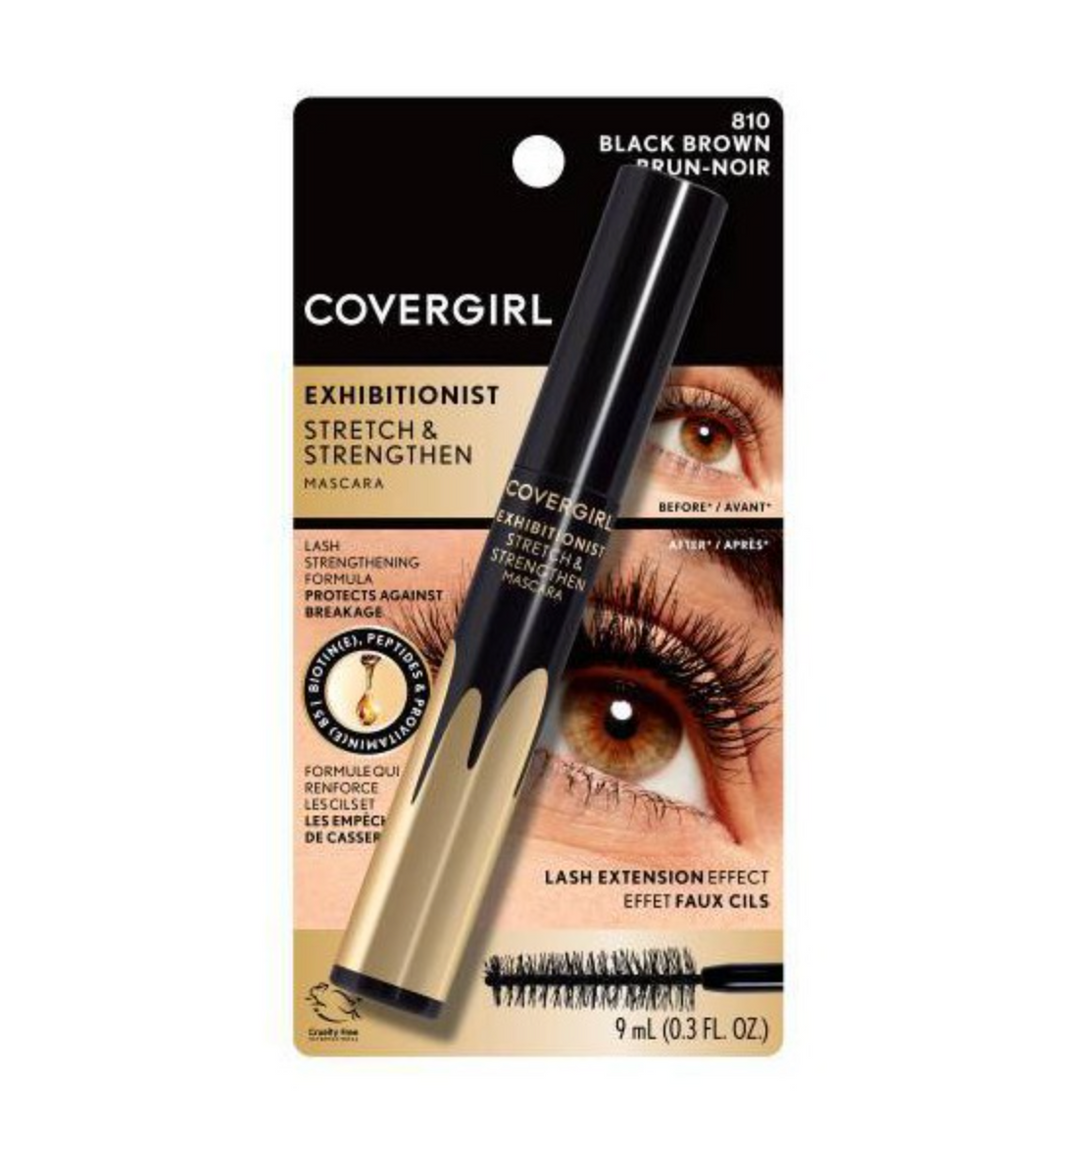 COVERGIRL Exhibitionist Stretch & Strengthen Mascara - 0.3 fl oz (Select Shade)